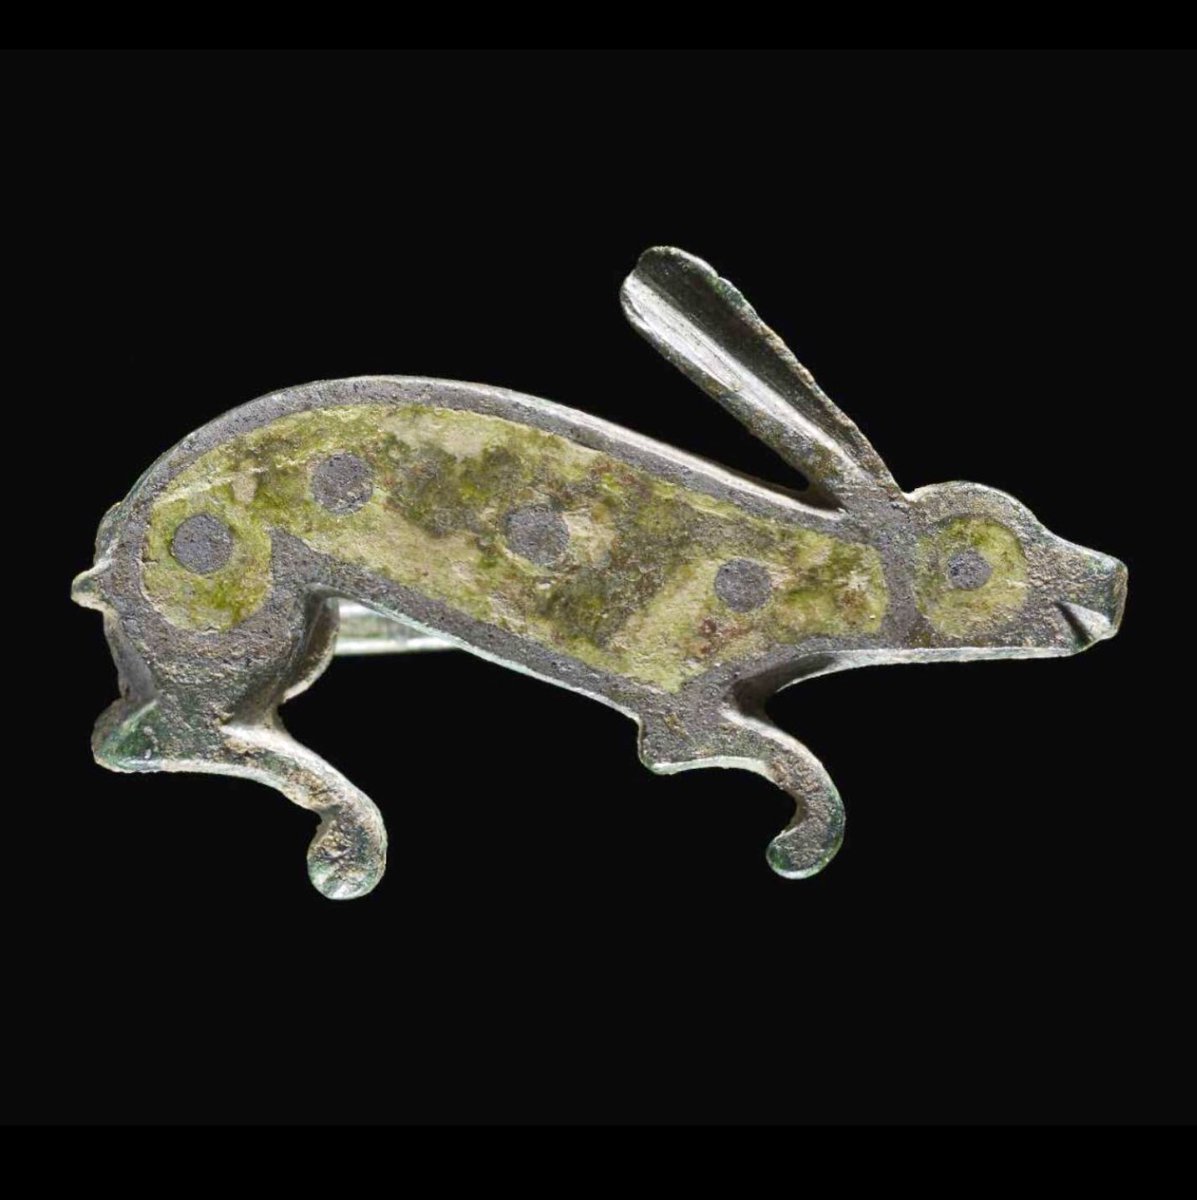 A lovely Romano-British brooch in the form of a hare. The person who made the brooch gave the hare a cheerful little face! 😍 At almost 2,000 years old, this delightful design wouldn’t look too out of place today! Copper alloy and enamel. Photo: British Museum